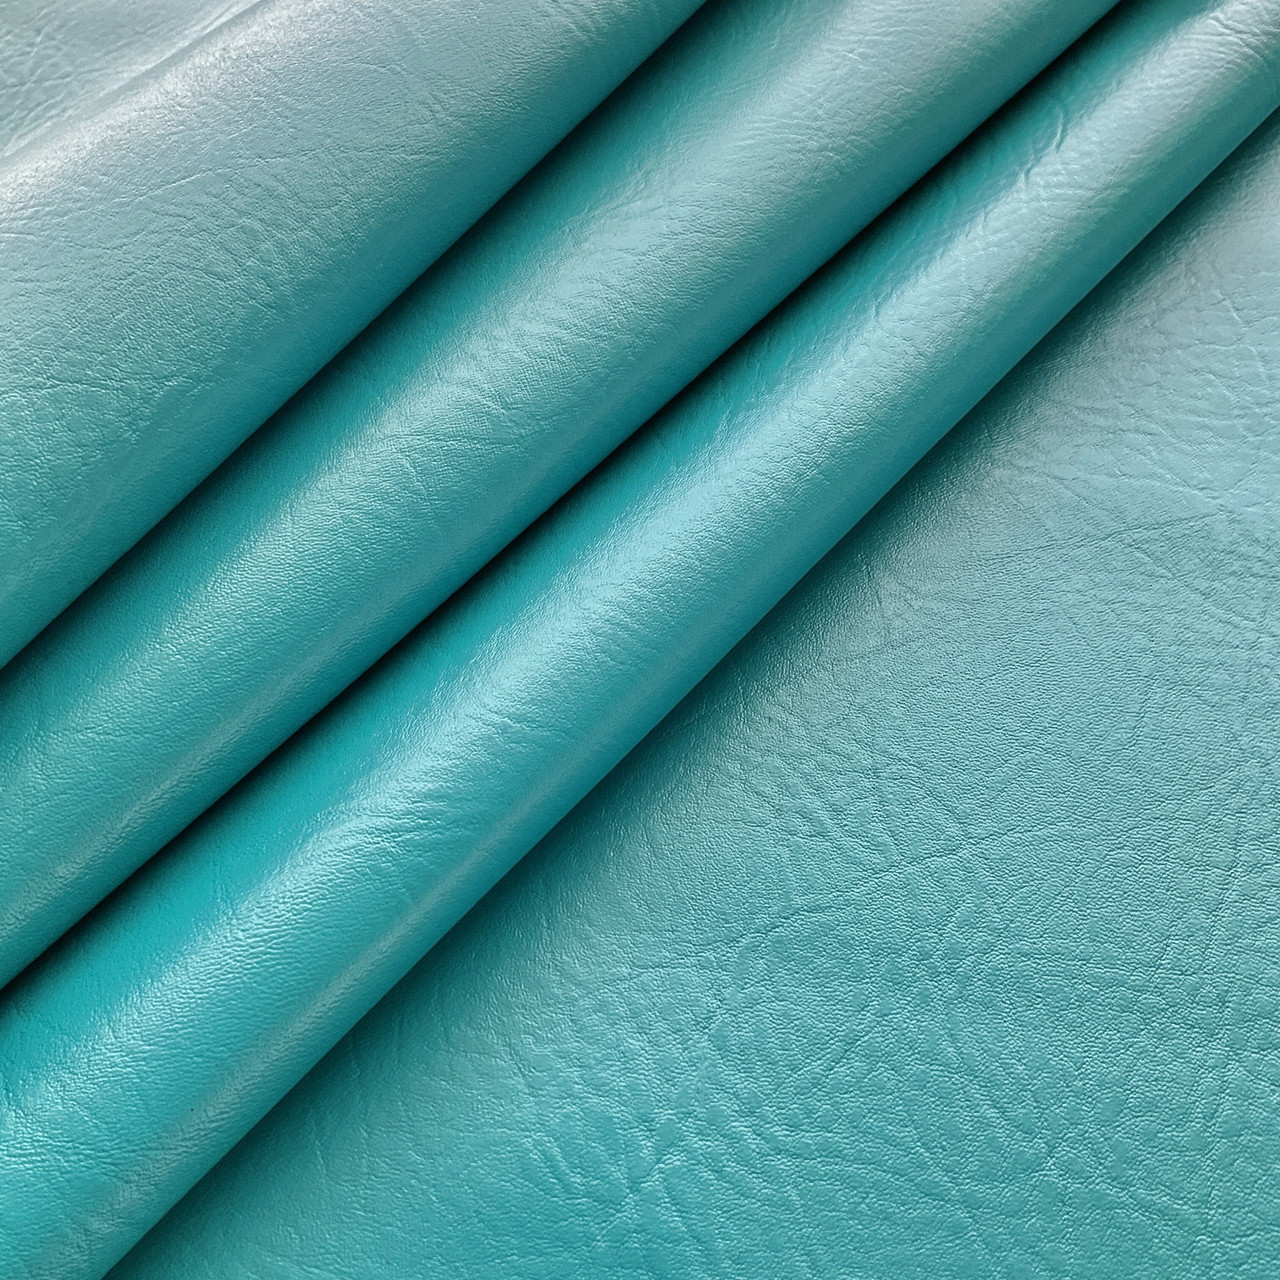 Fabric-like PVC upholstery - Specialty Fabrics Review